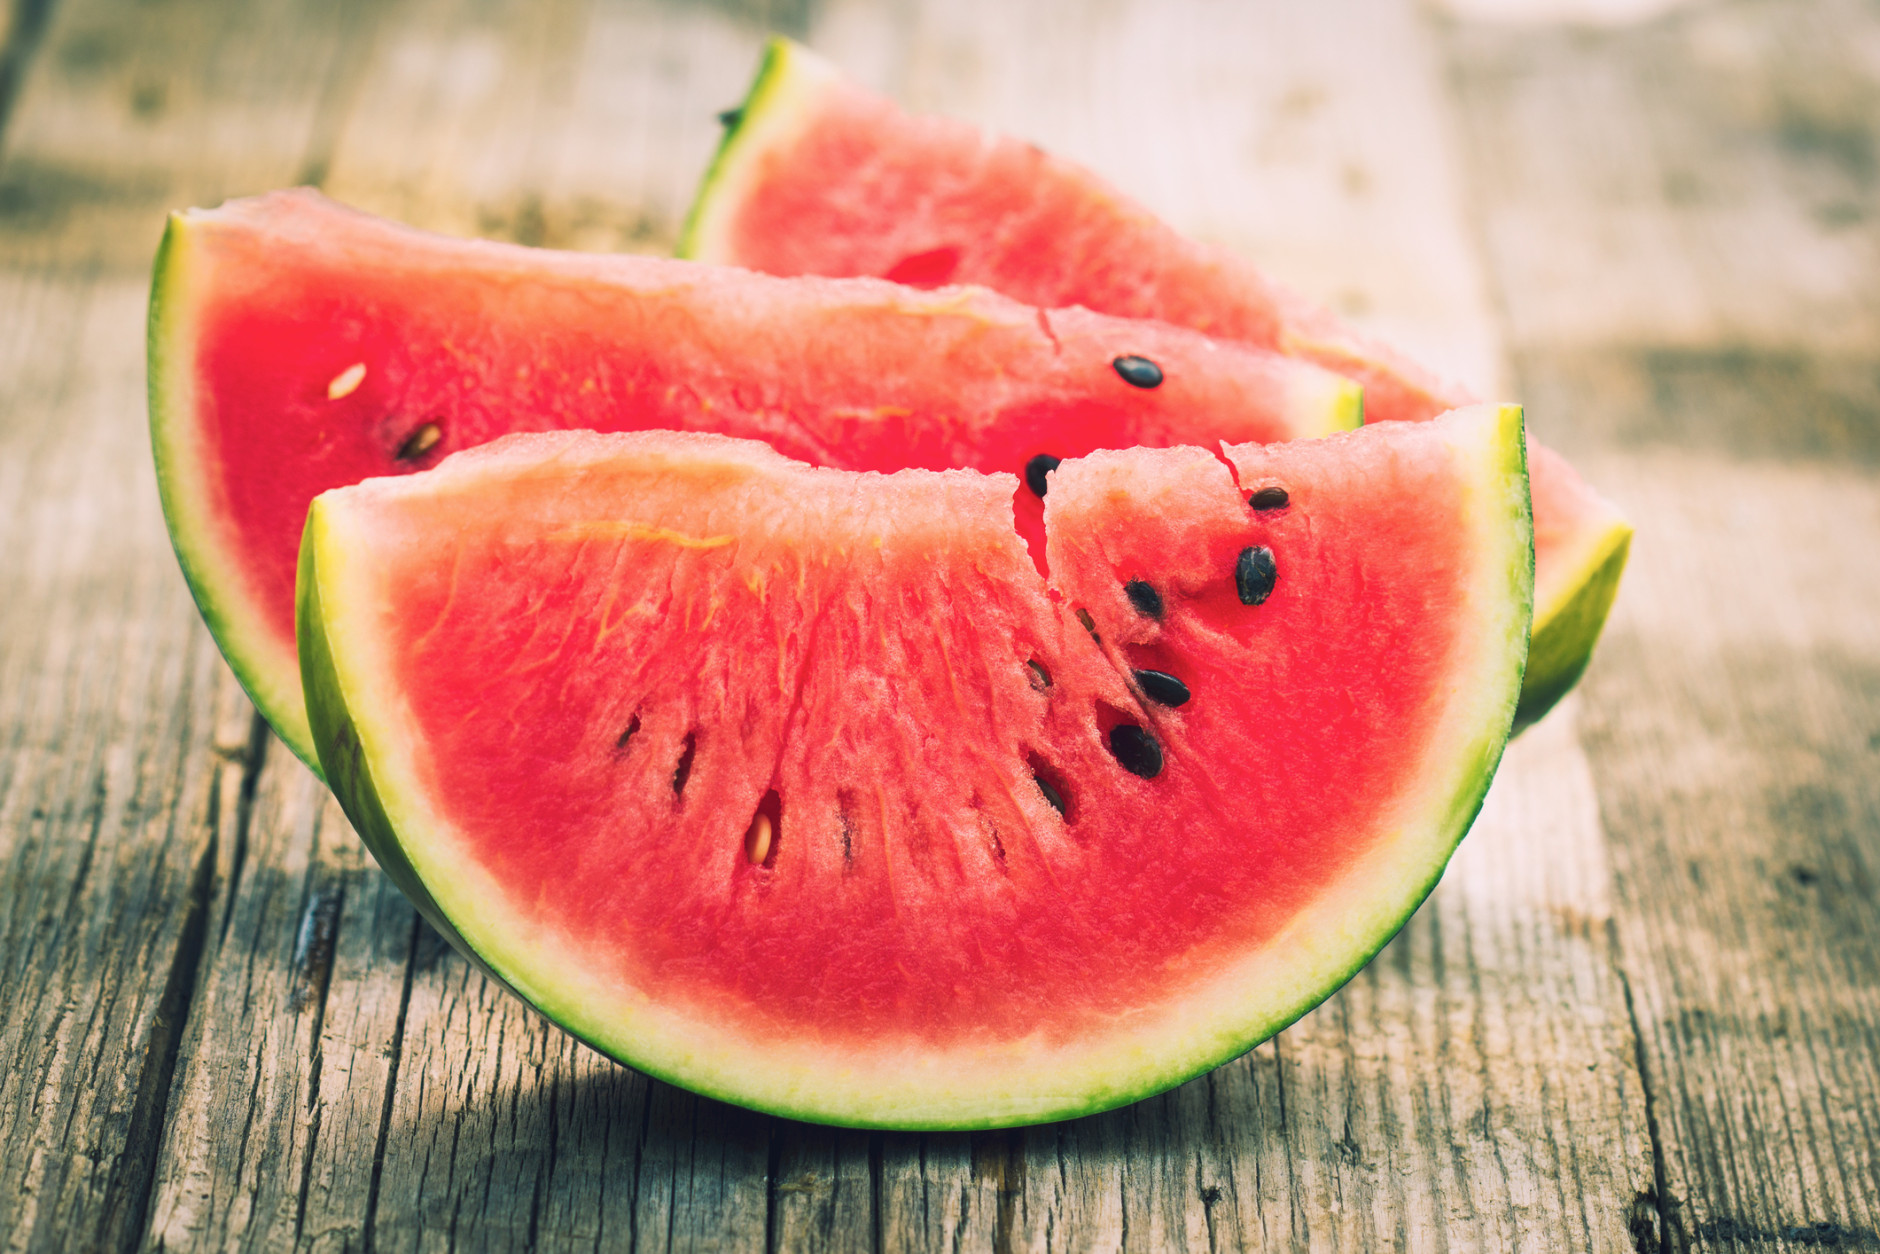 In case you need more reasons to serve up this sweet and juicy summertime favorite at your next BBQ, here are 10 surprising facts about watermelon. (Getty Images)